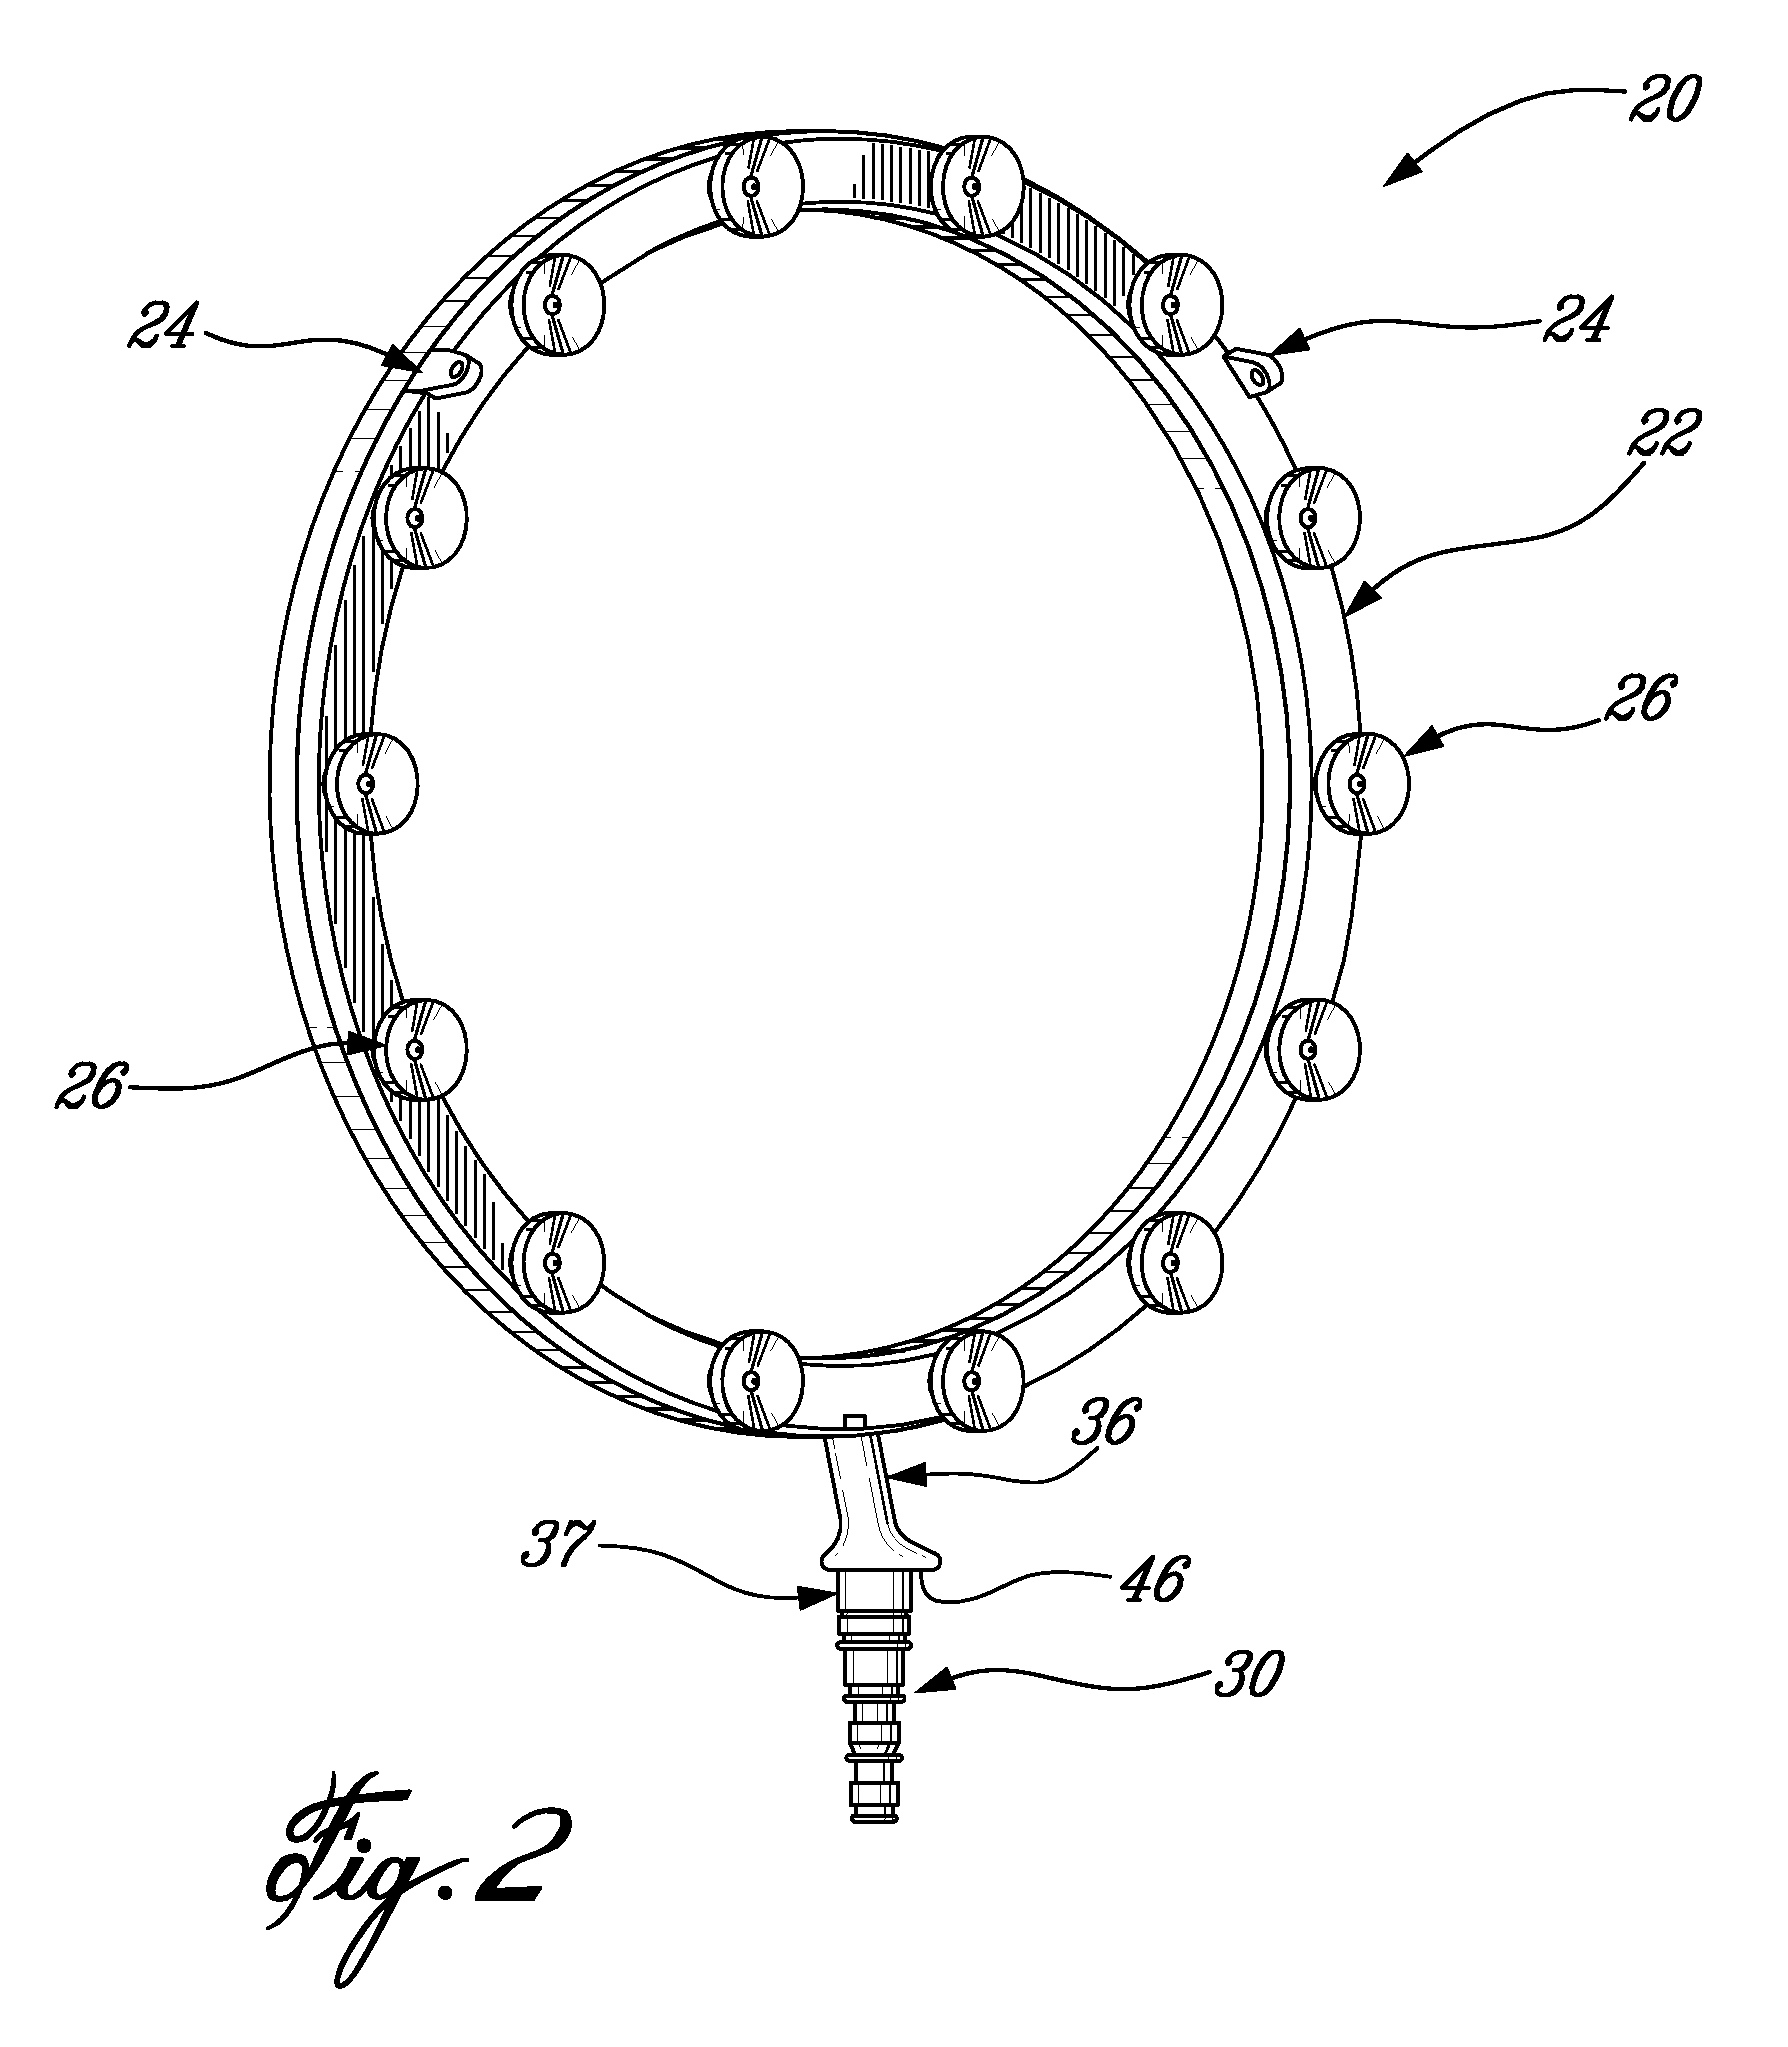 Internal fuel manifold and fuel fairing interface